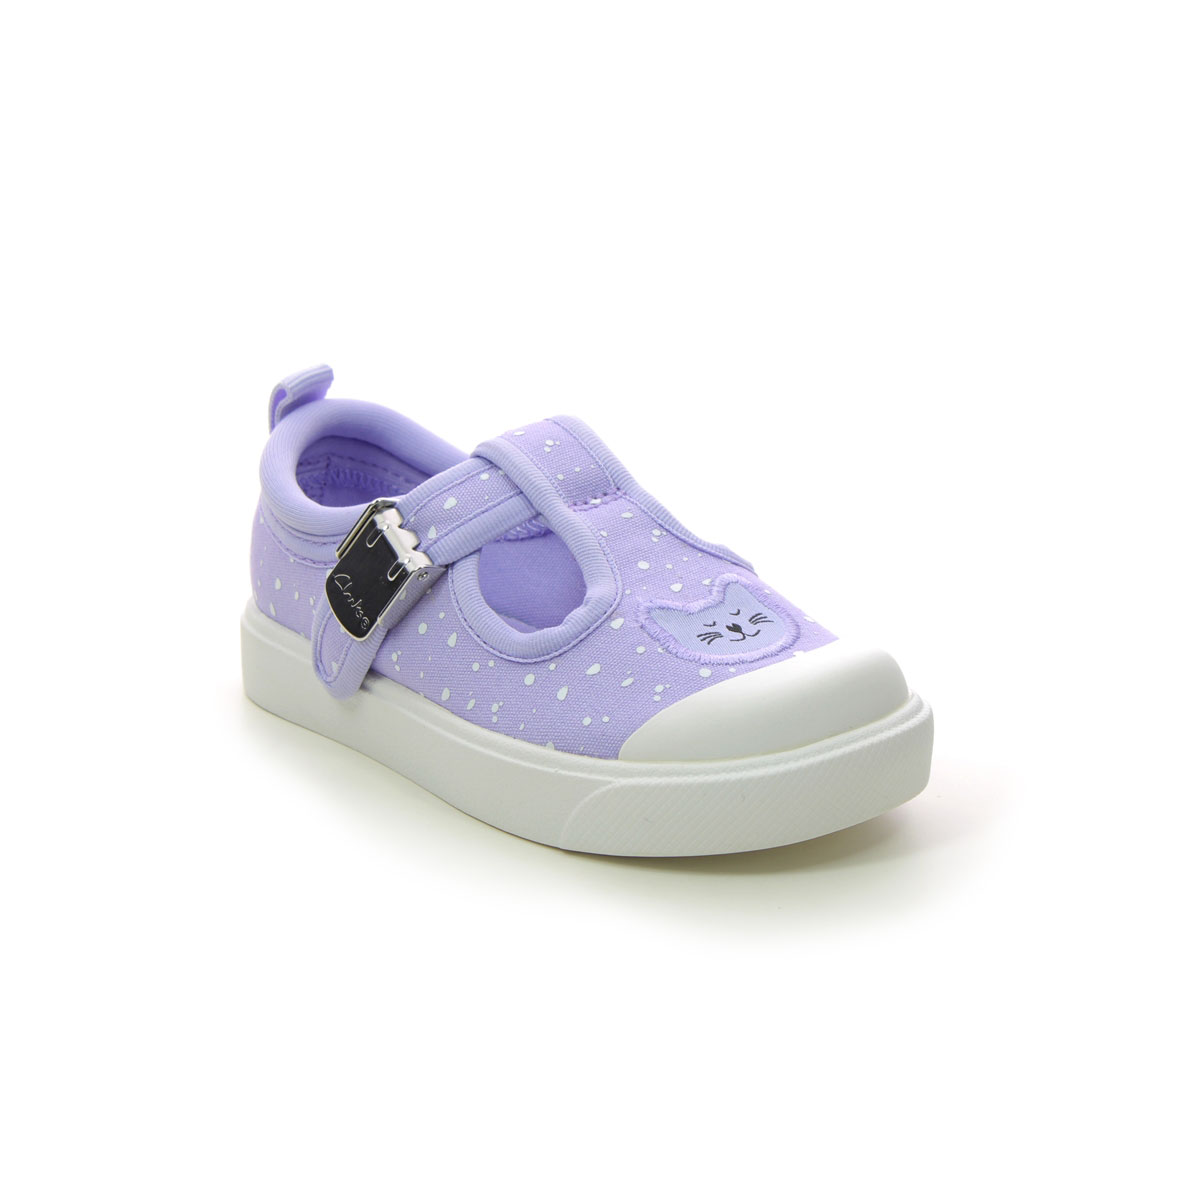 Clarks City Dance T Lilac Kids toddler girls trainers 7159-36F in a Plain Canvas in Size 8